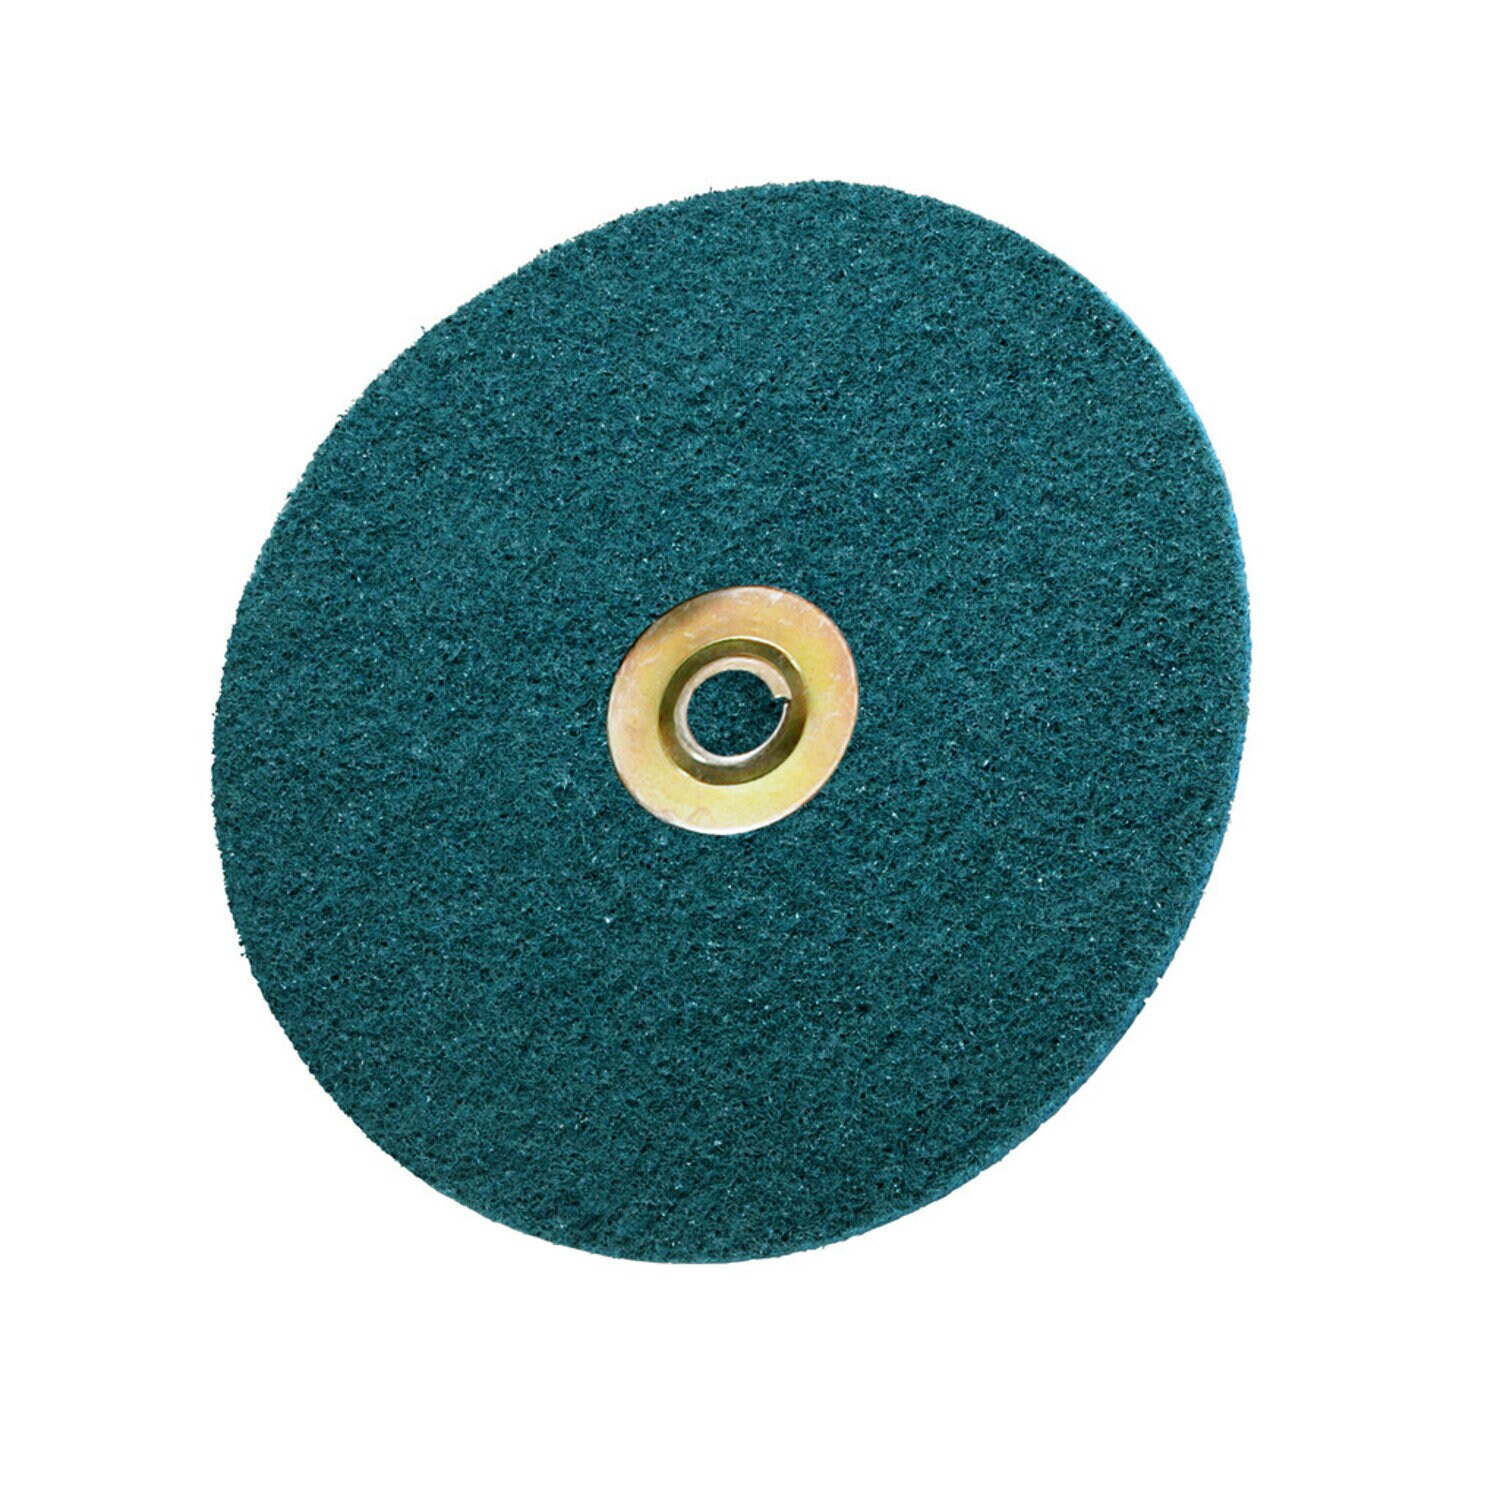 7010309844 - Scotch-Brite Surface Conditioning TN Quick Change Disc, SC-DN, A/O Very
Fine, 4-1/2 in, 50 ea/Case